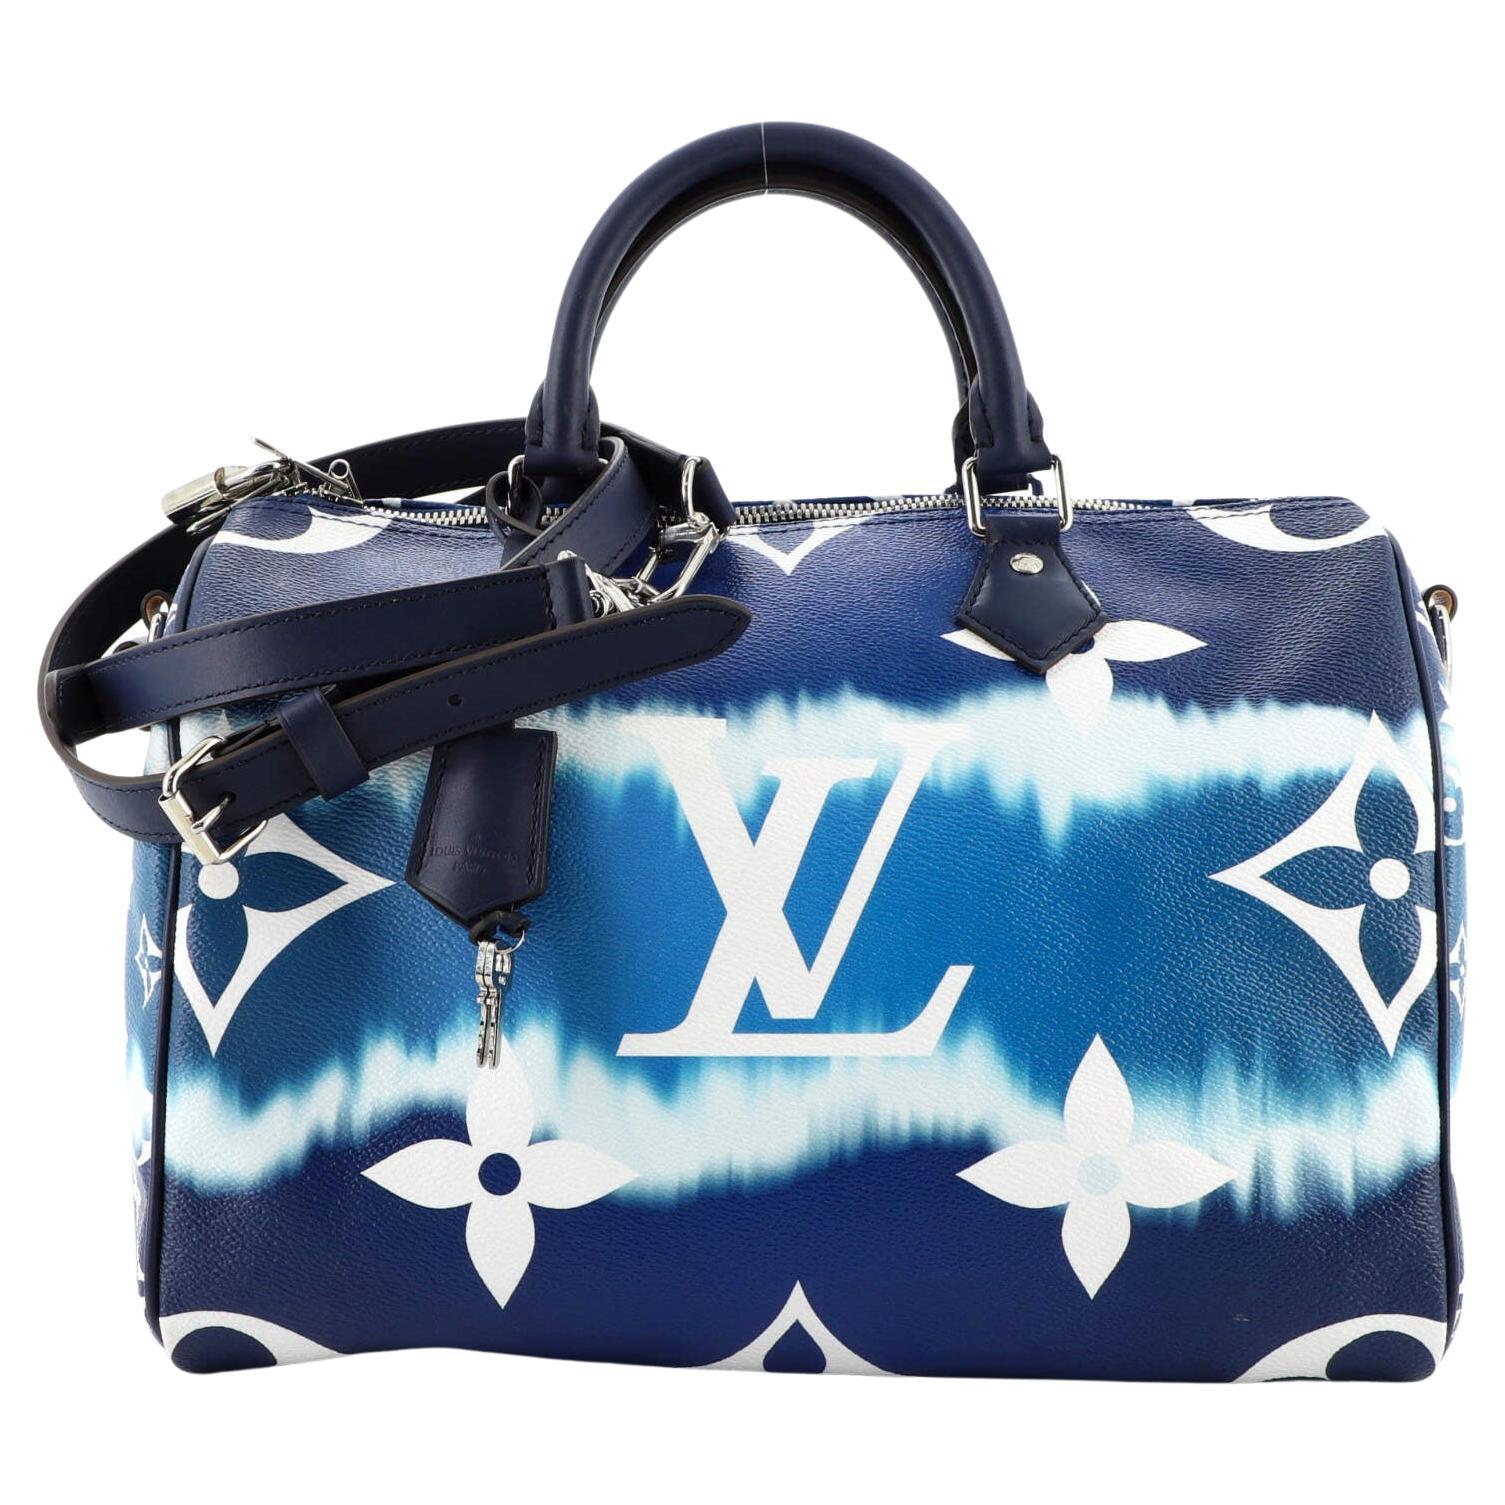 Introducing the new LV  Fashion, Louis vuitton speedy bandouliere